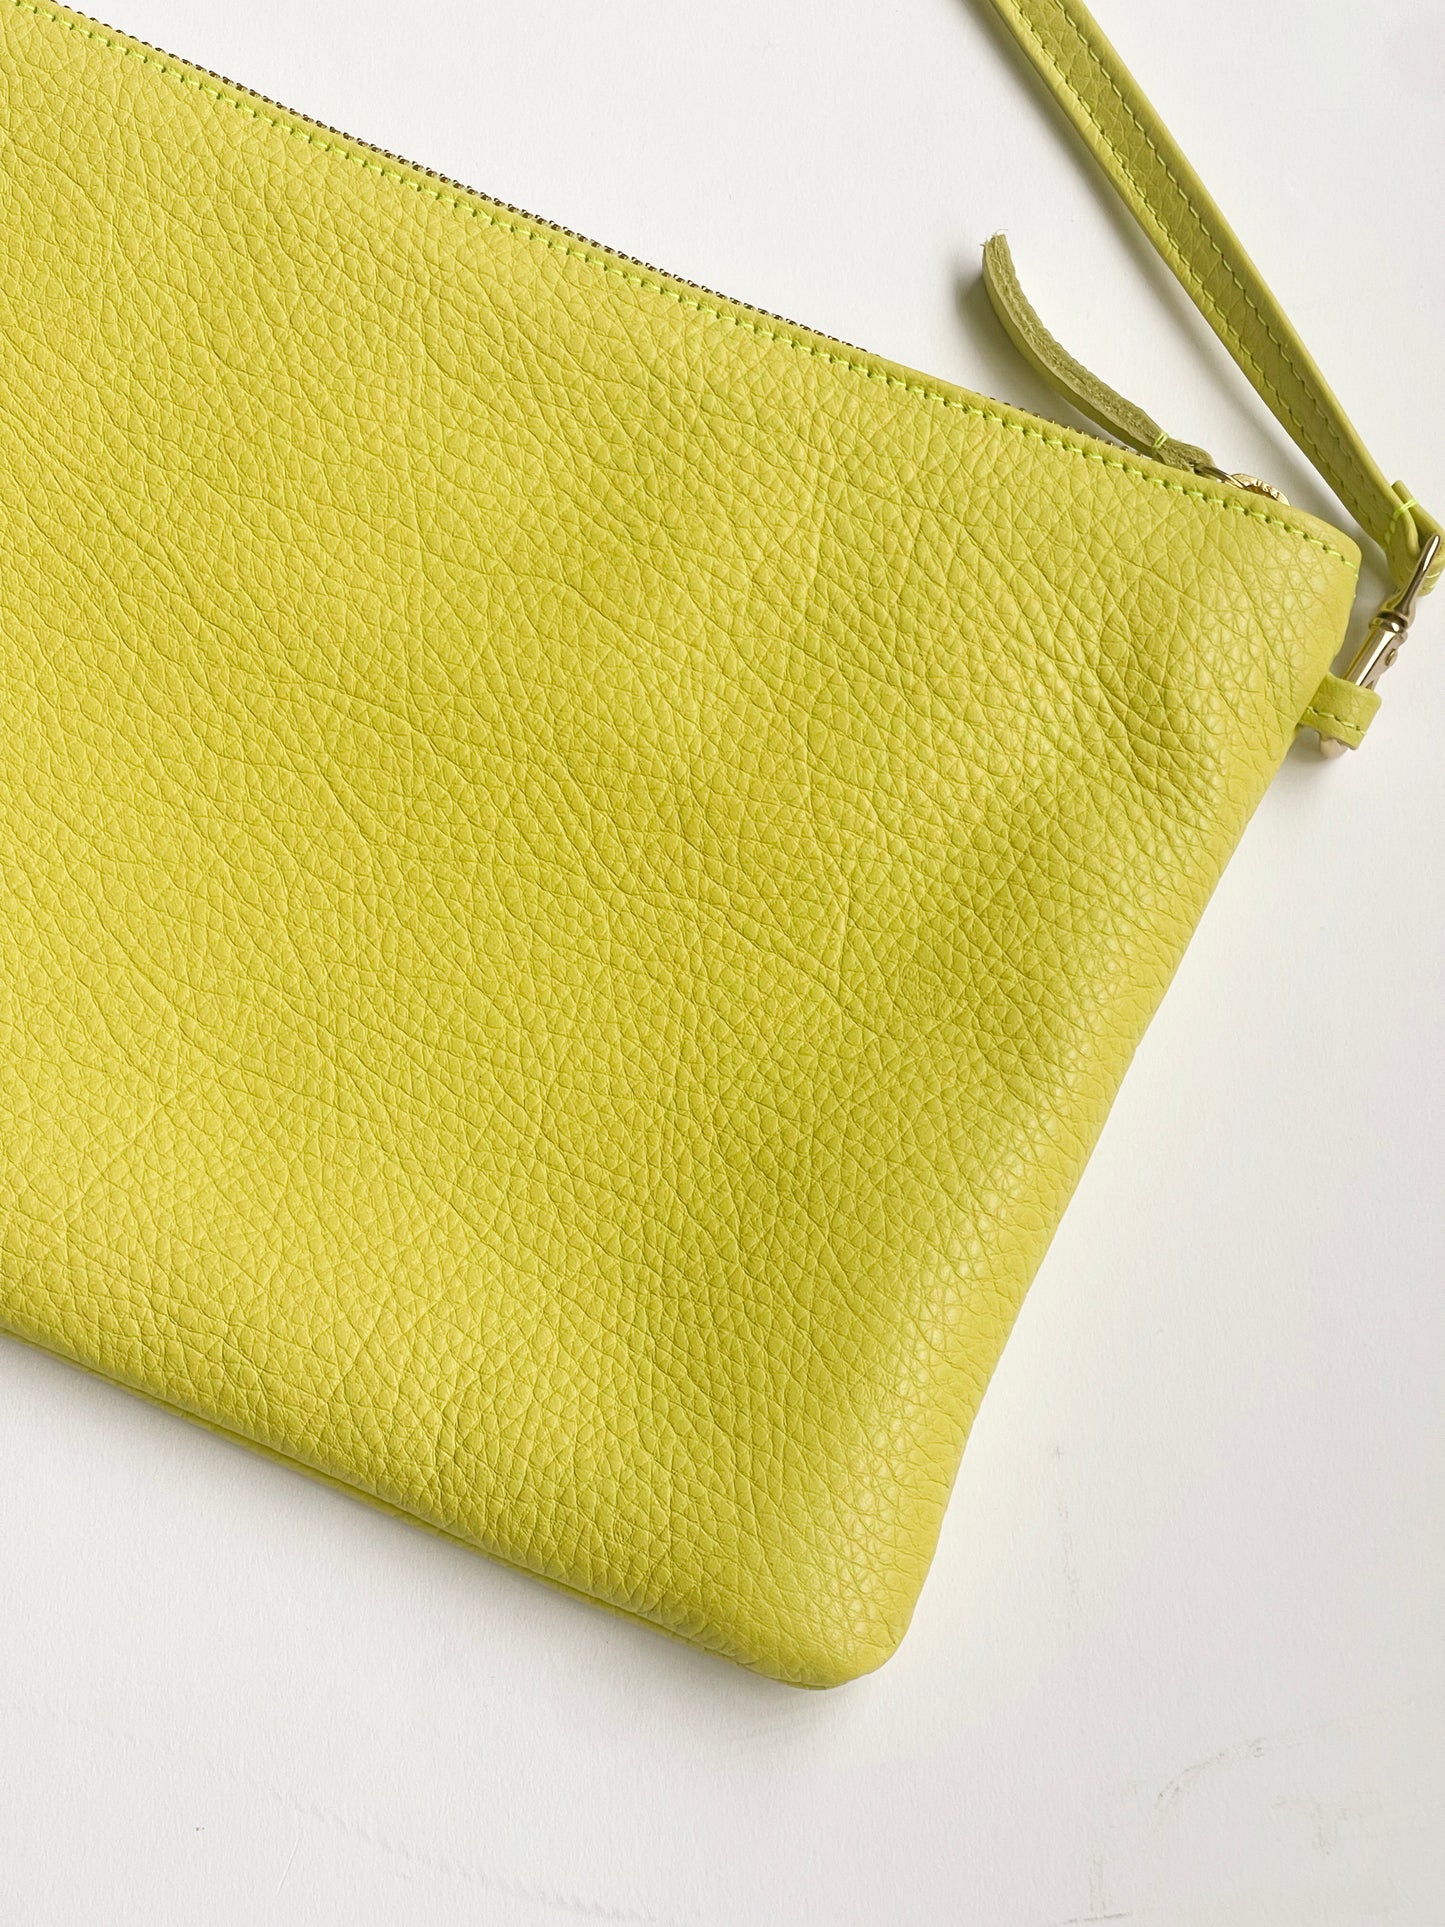 Primecut Leather Pouch Purse in CHARTREUSE